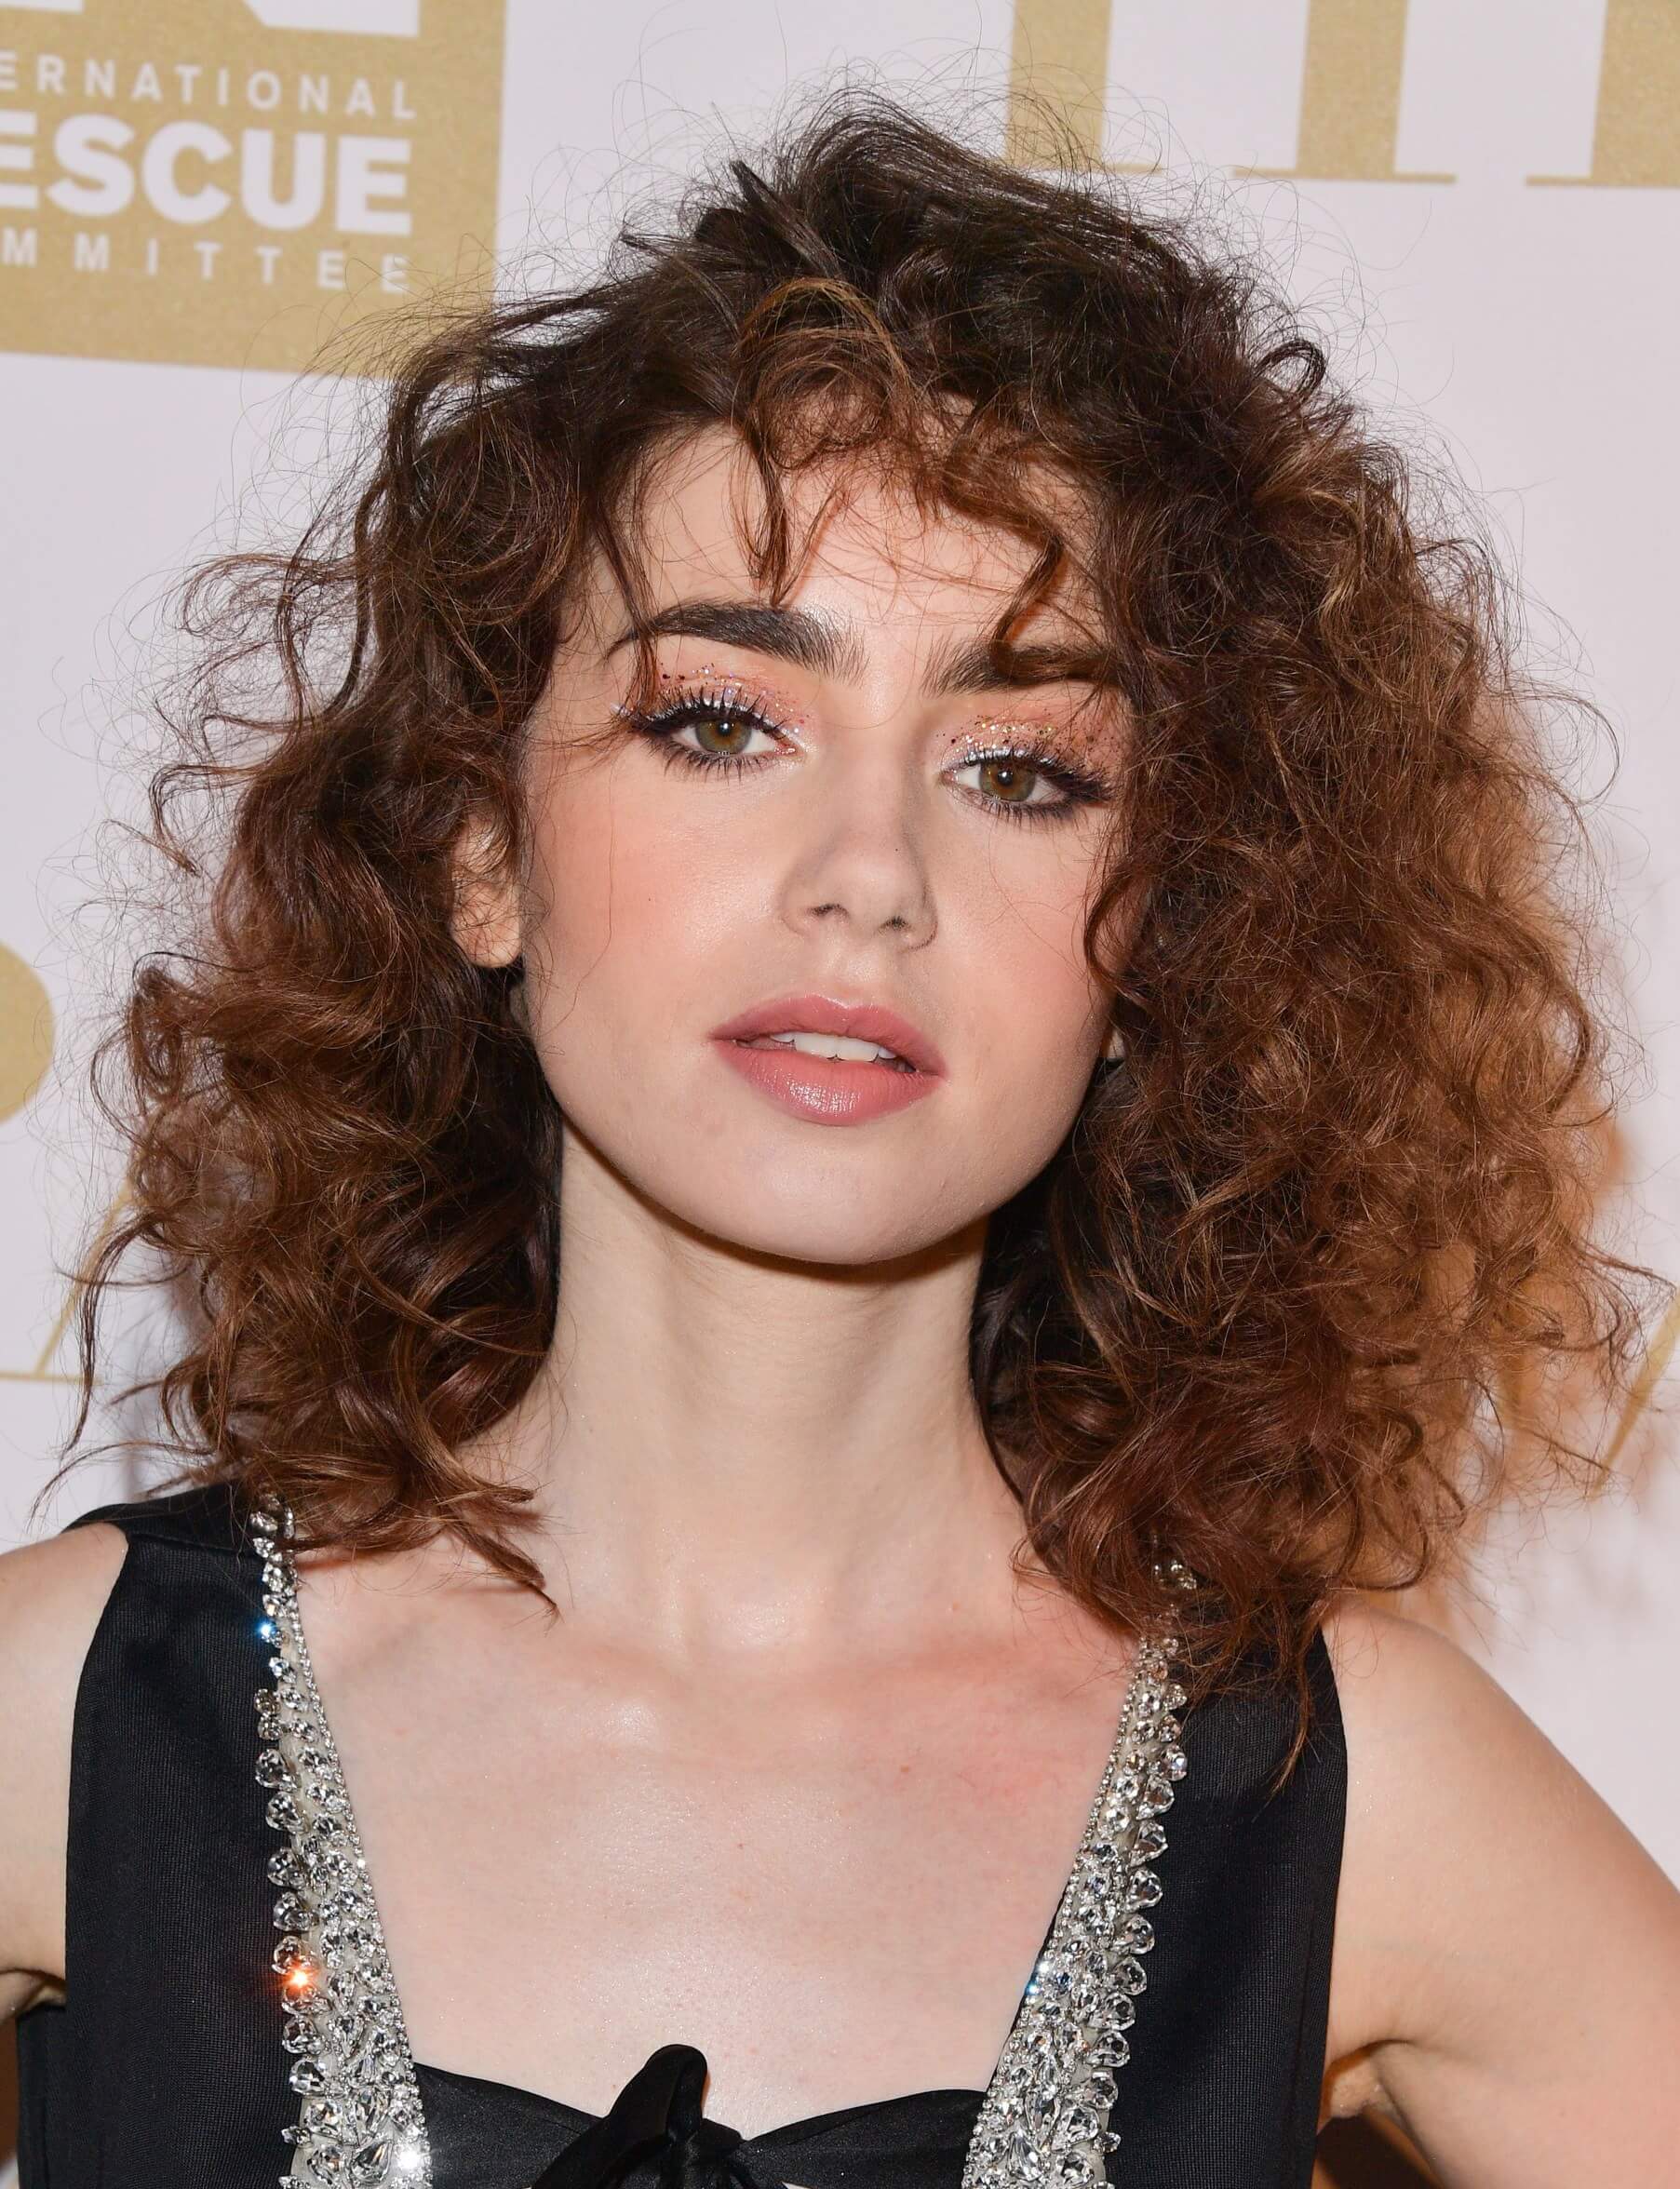 flaunt your curls with these 20 curly hairstyles with bangs